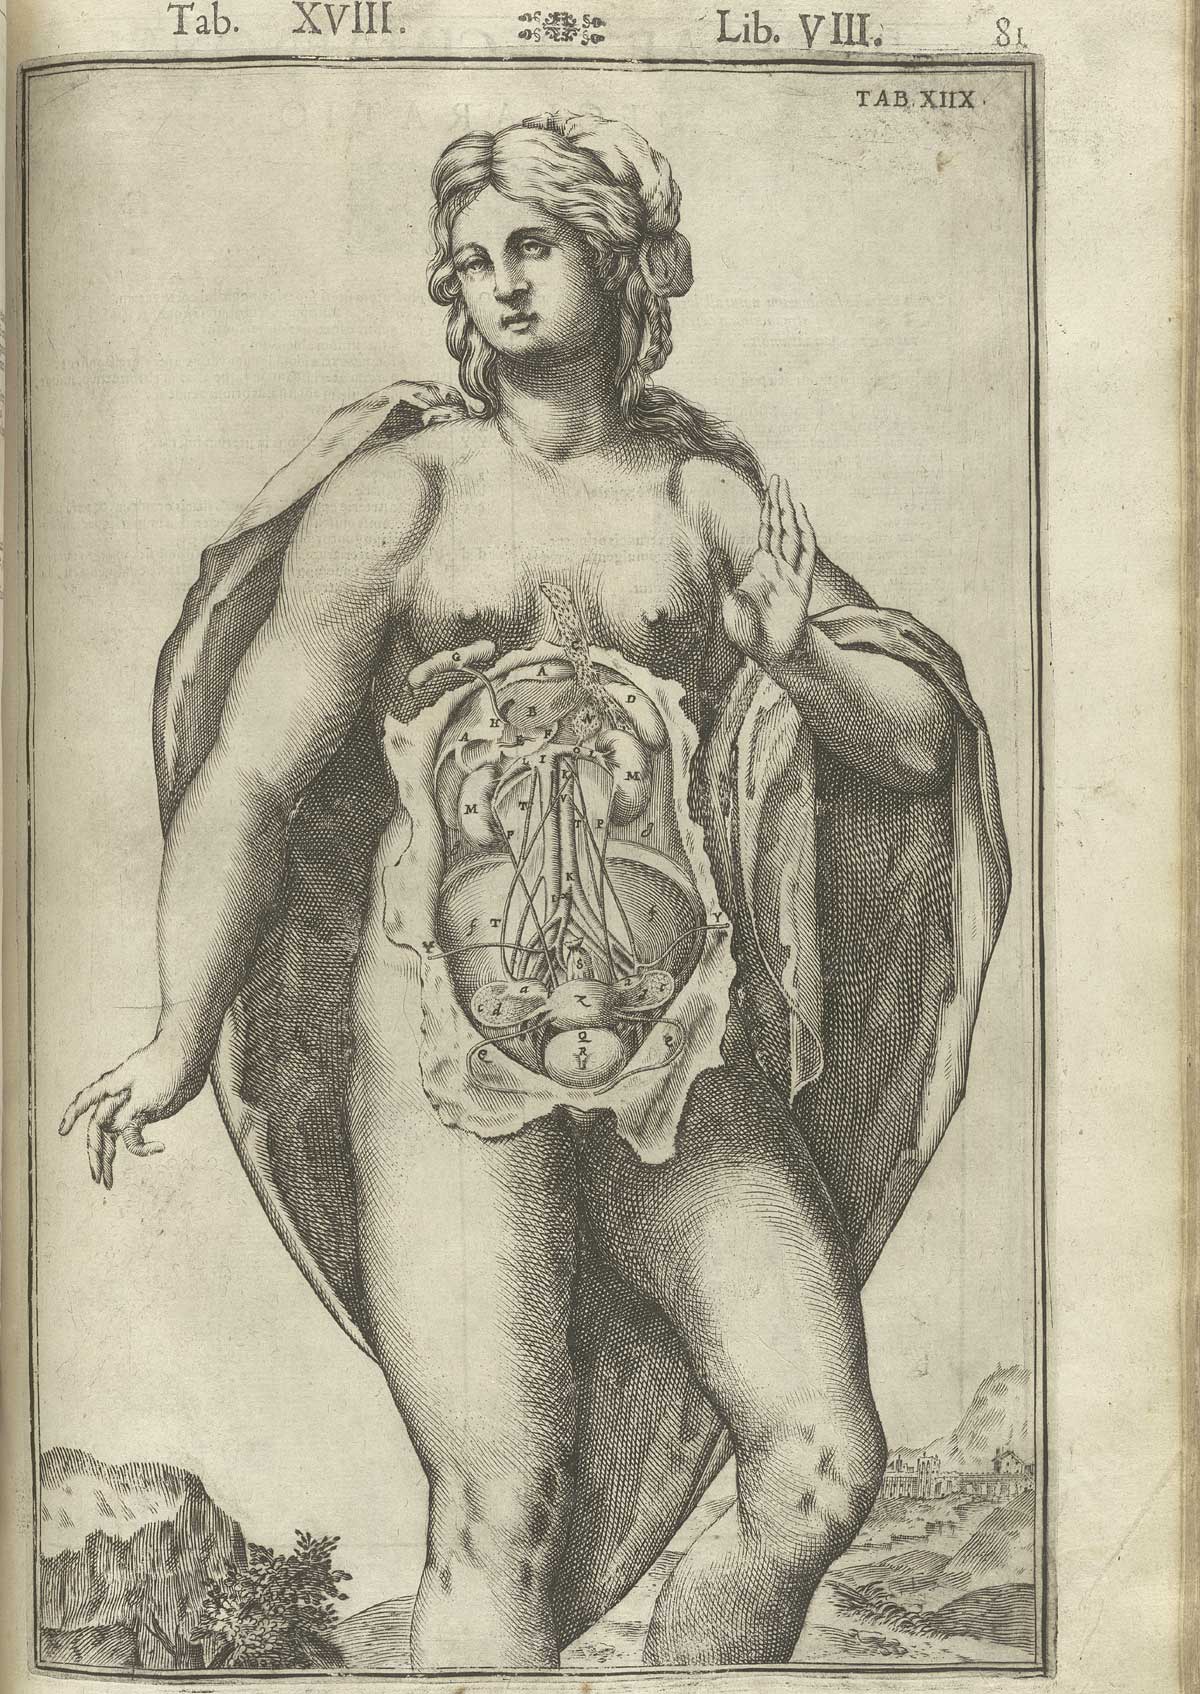 Engraving showing a facing standing nude female anatomical figure in a pastoral setting with an open torso and abdomen exposing the urological and reproductive systems including kidneys, ureters, uterus, ovaries, bladder and associated circulatory system; the woman is wearing a cape on her back draped over her to make her figure resemble a heart shape; from Adriaan van de Spiegel and Giulio Cassieri’s De humani corporis fabrica libri decem, Venice, 1627, NLM call no. WZ 250 S755dh 1627.